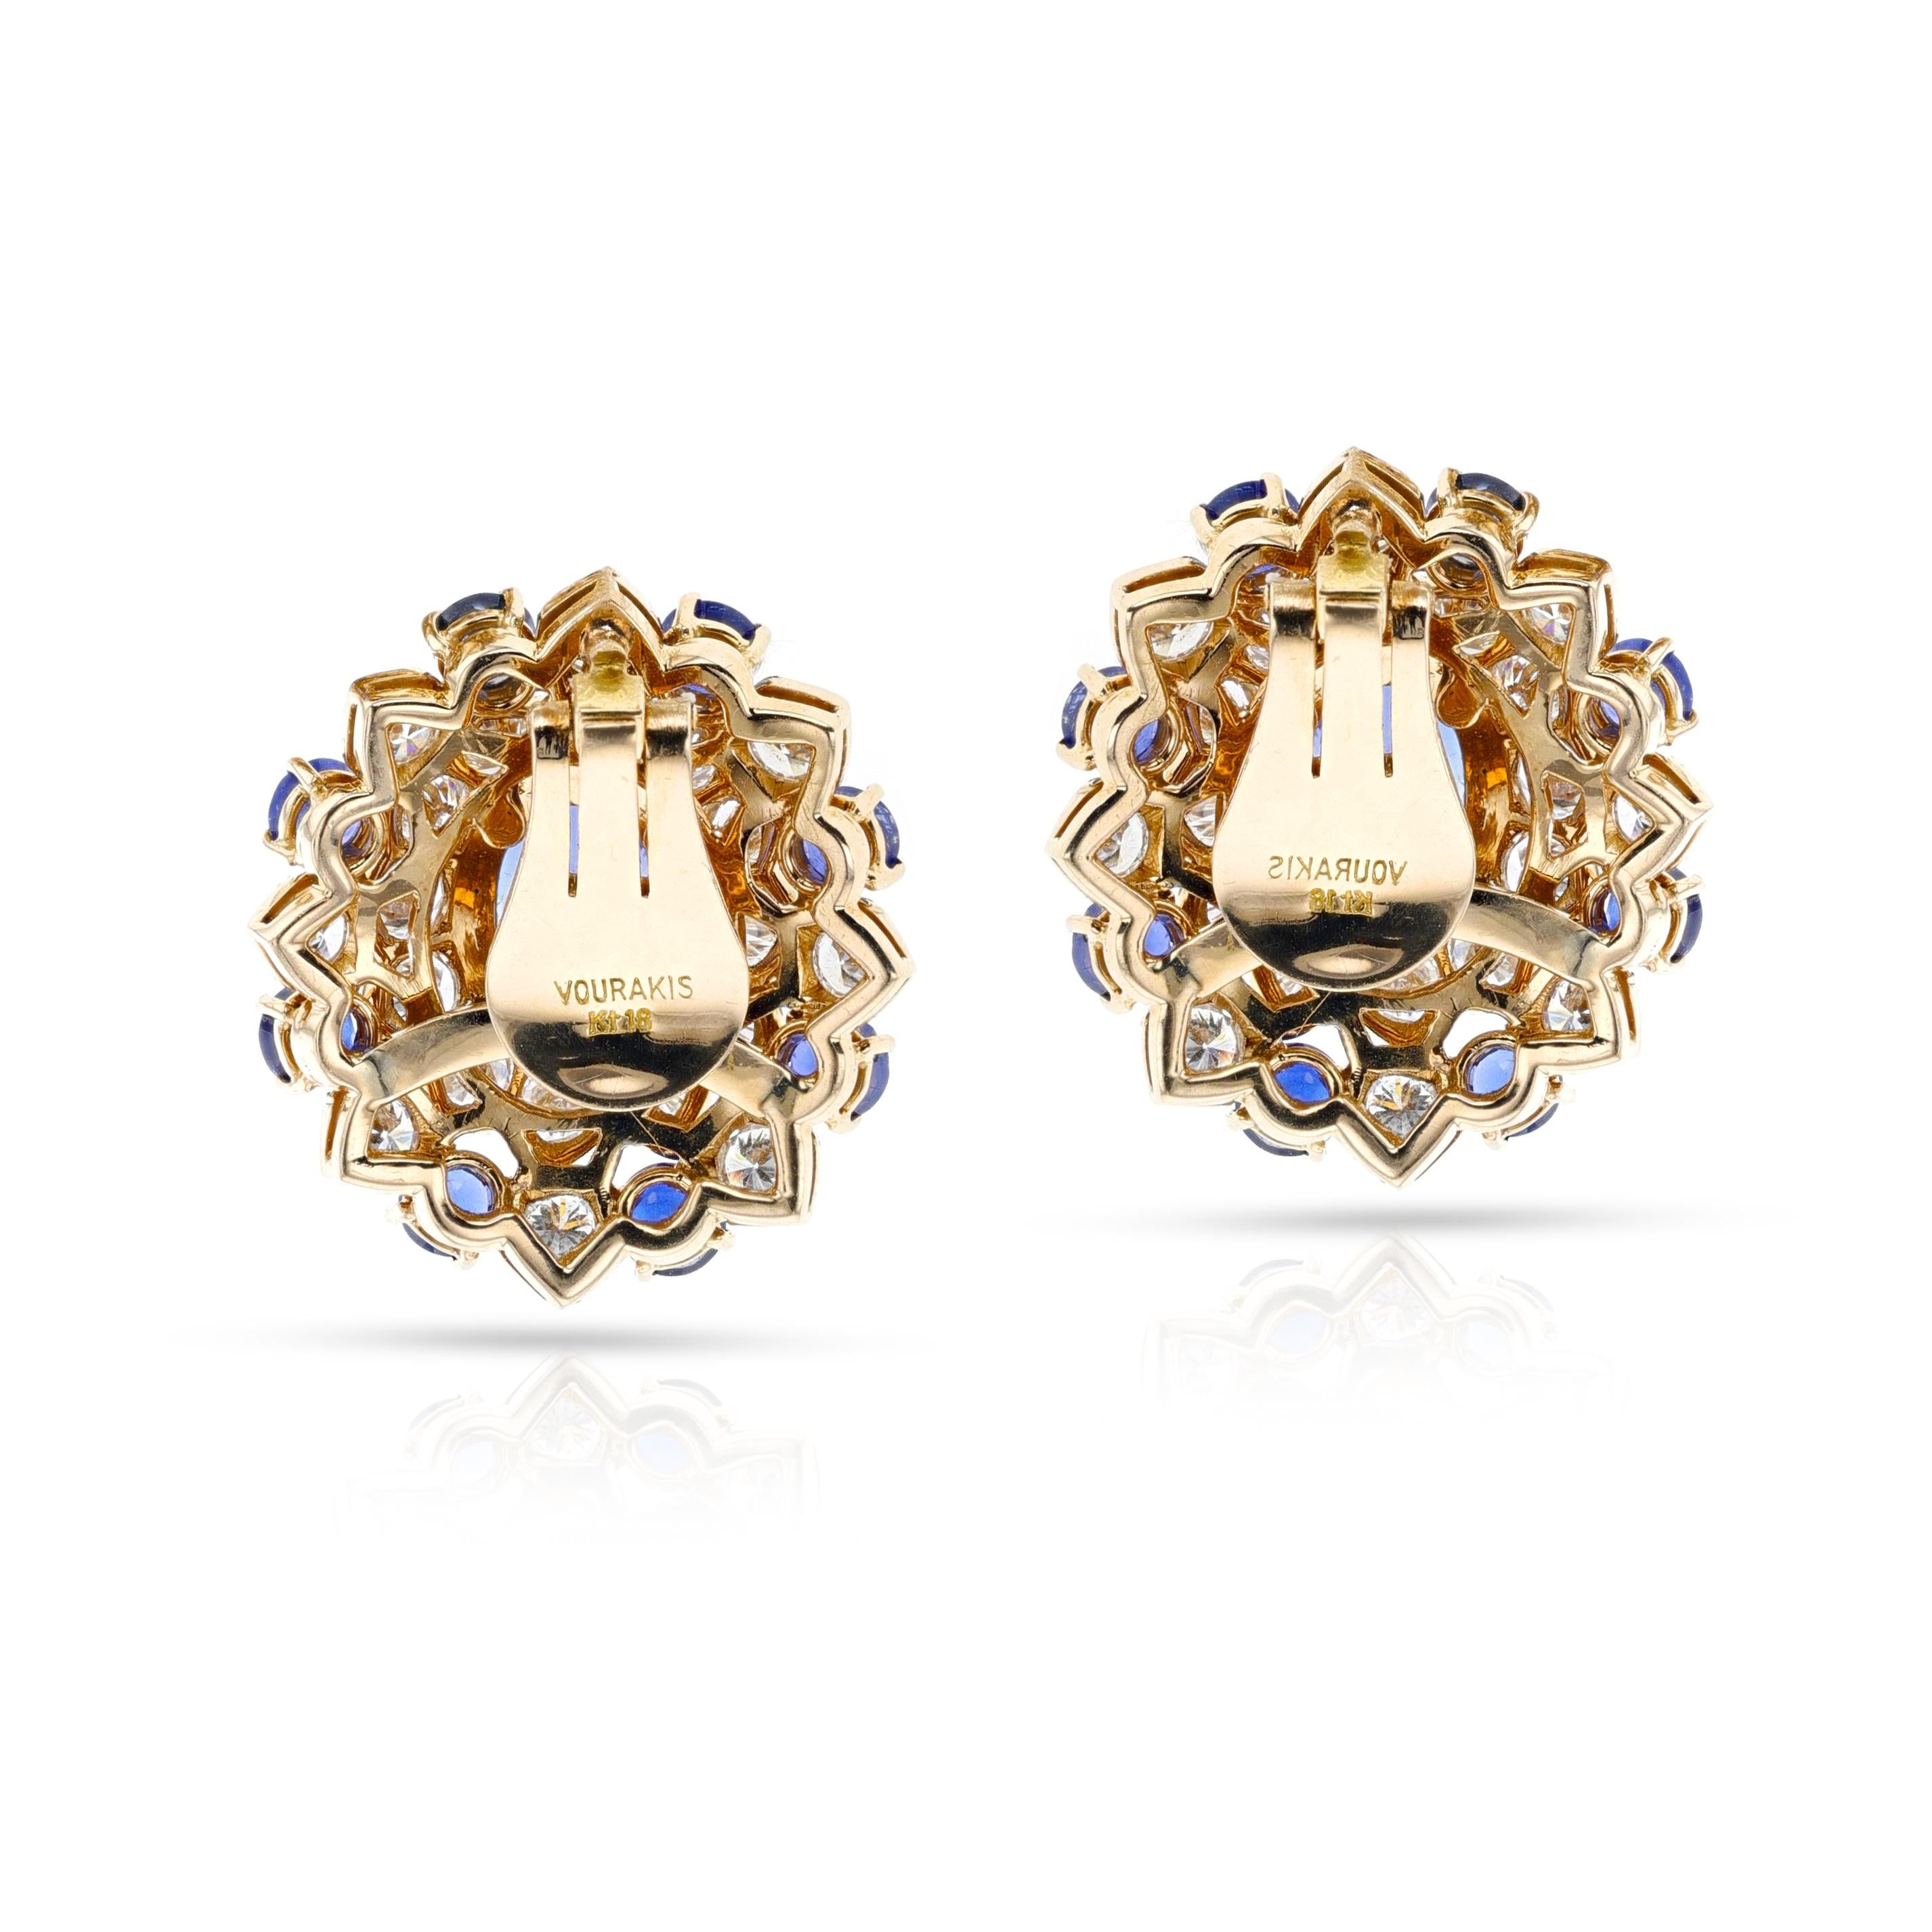 An exceptional Vourakis Sapphire and Diamond Earrings, Brooch, and Ring Suite made in 18k Gold. The prominent sapphires weighing approximately 3.03, 2.81, 2.87 and 5.02 carats, the diamonds totaling 20-25 carats. The smaller sapphires totaling 4.5-